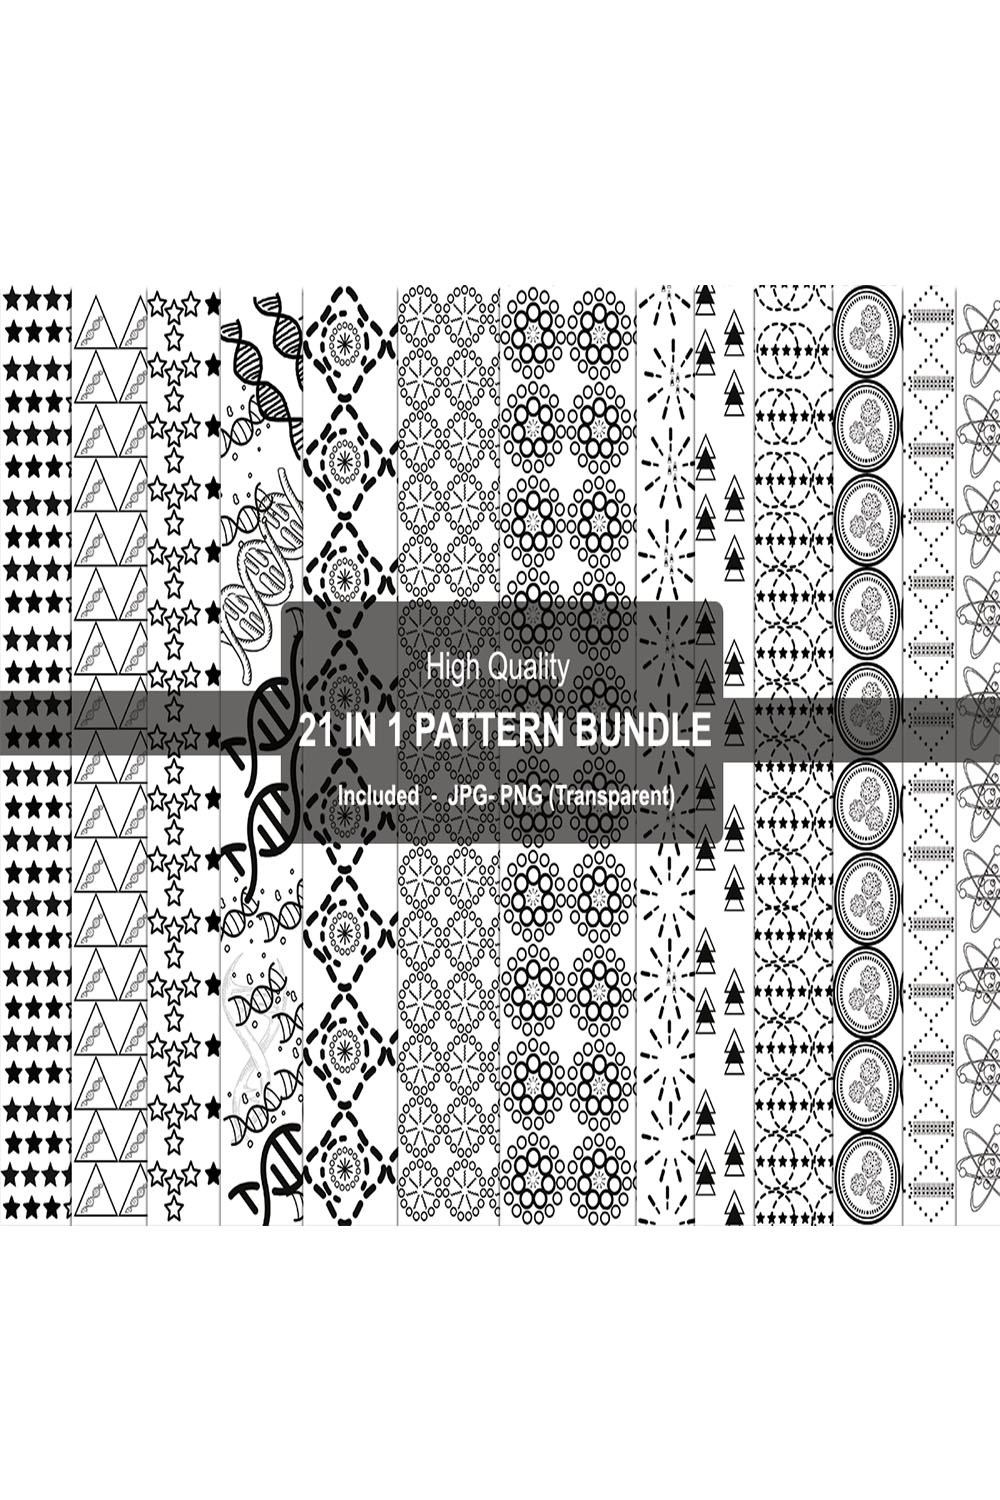 Exclusive Black and White Pattern Design pinterest image.